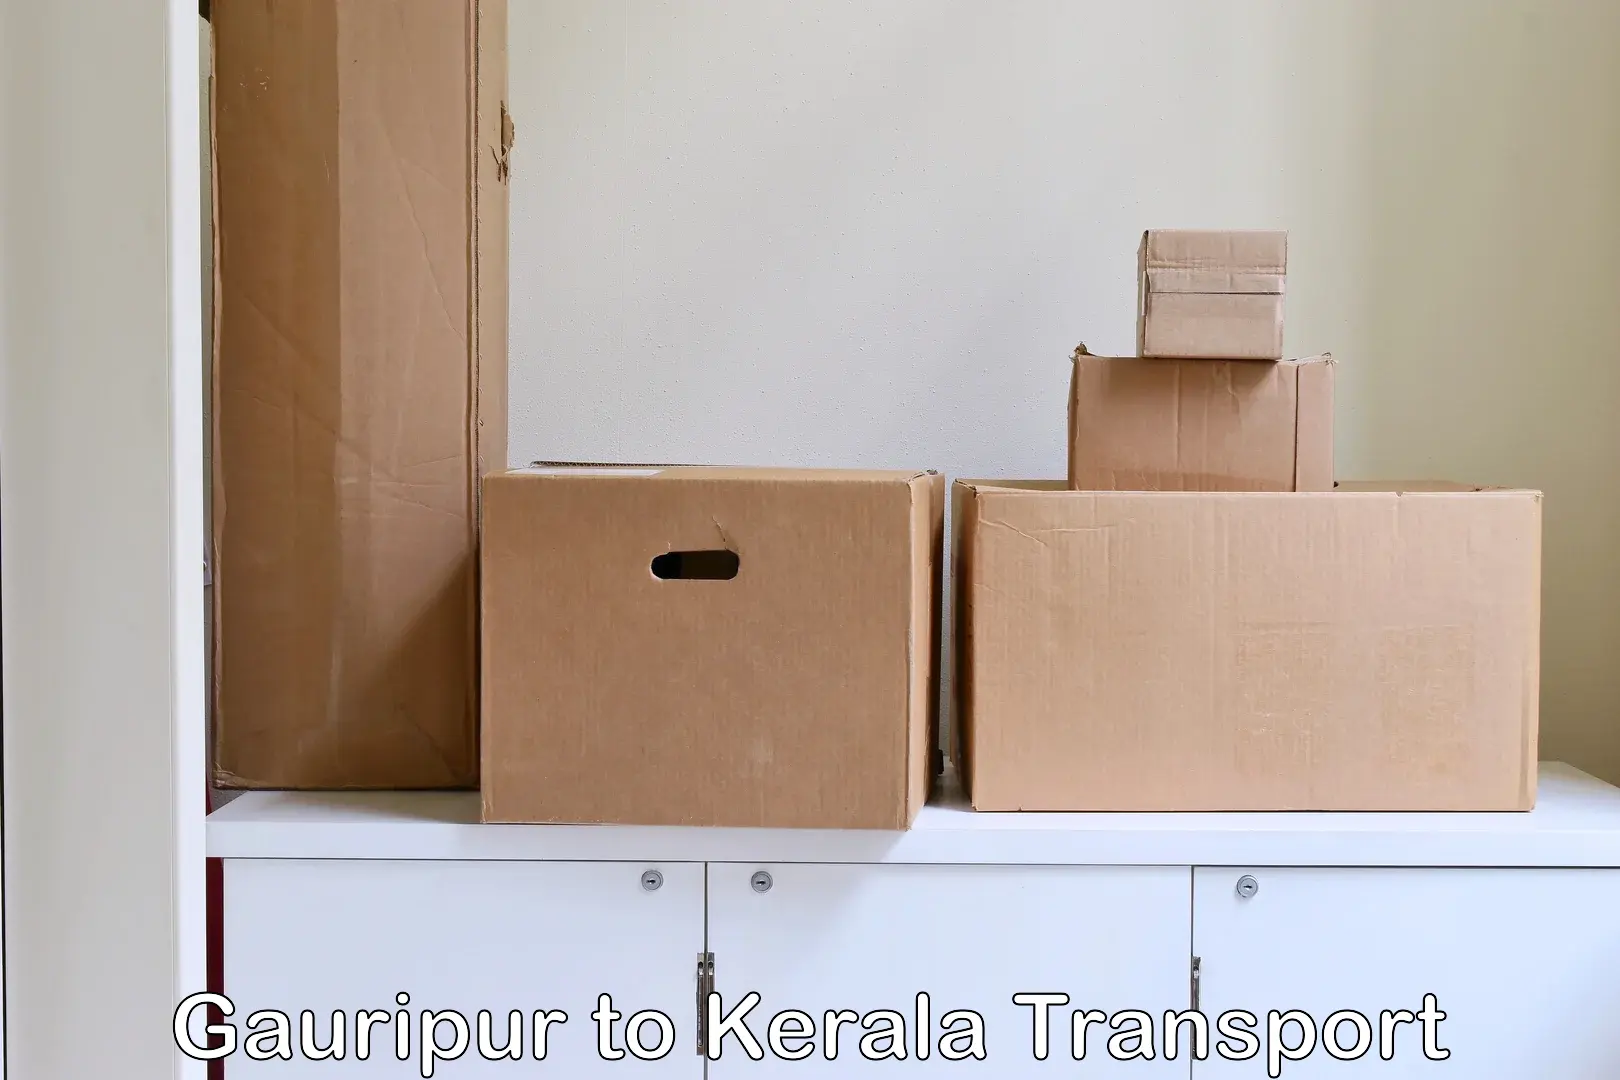 Road transport online services Gauripur to Palakkad